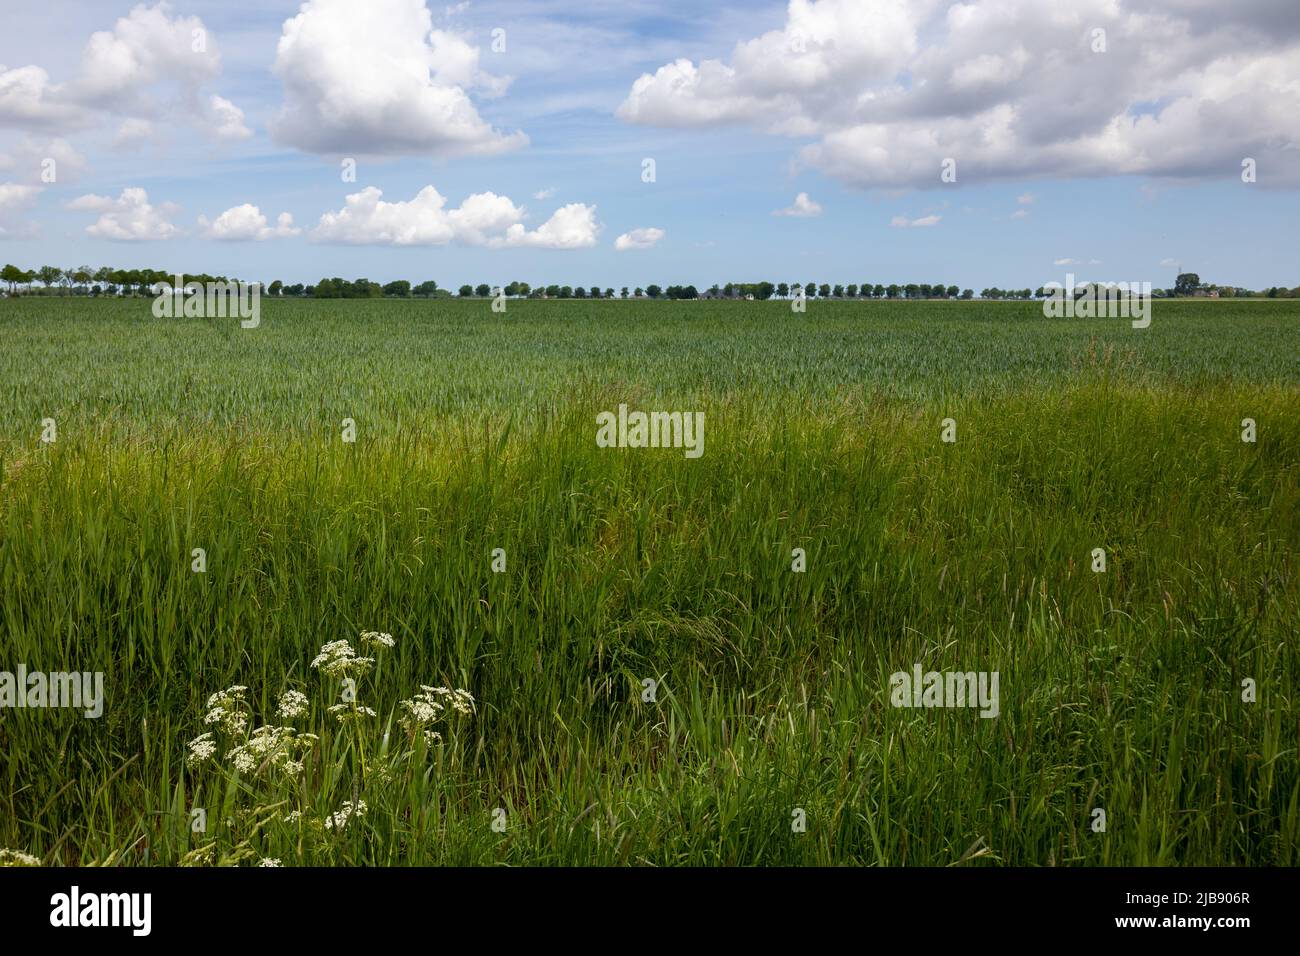 Typical Dutch landscape in the province of Groningen near the village of Vierhuizen with a flat farming landscape and panoramic views Stock Photo